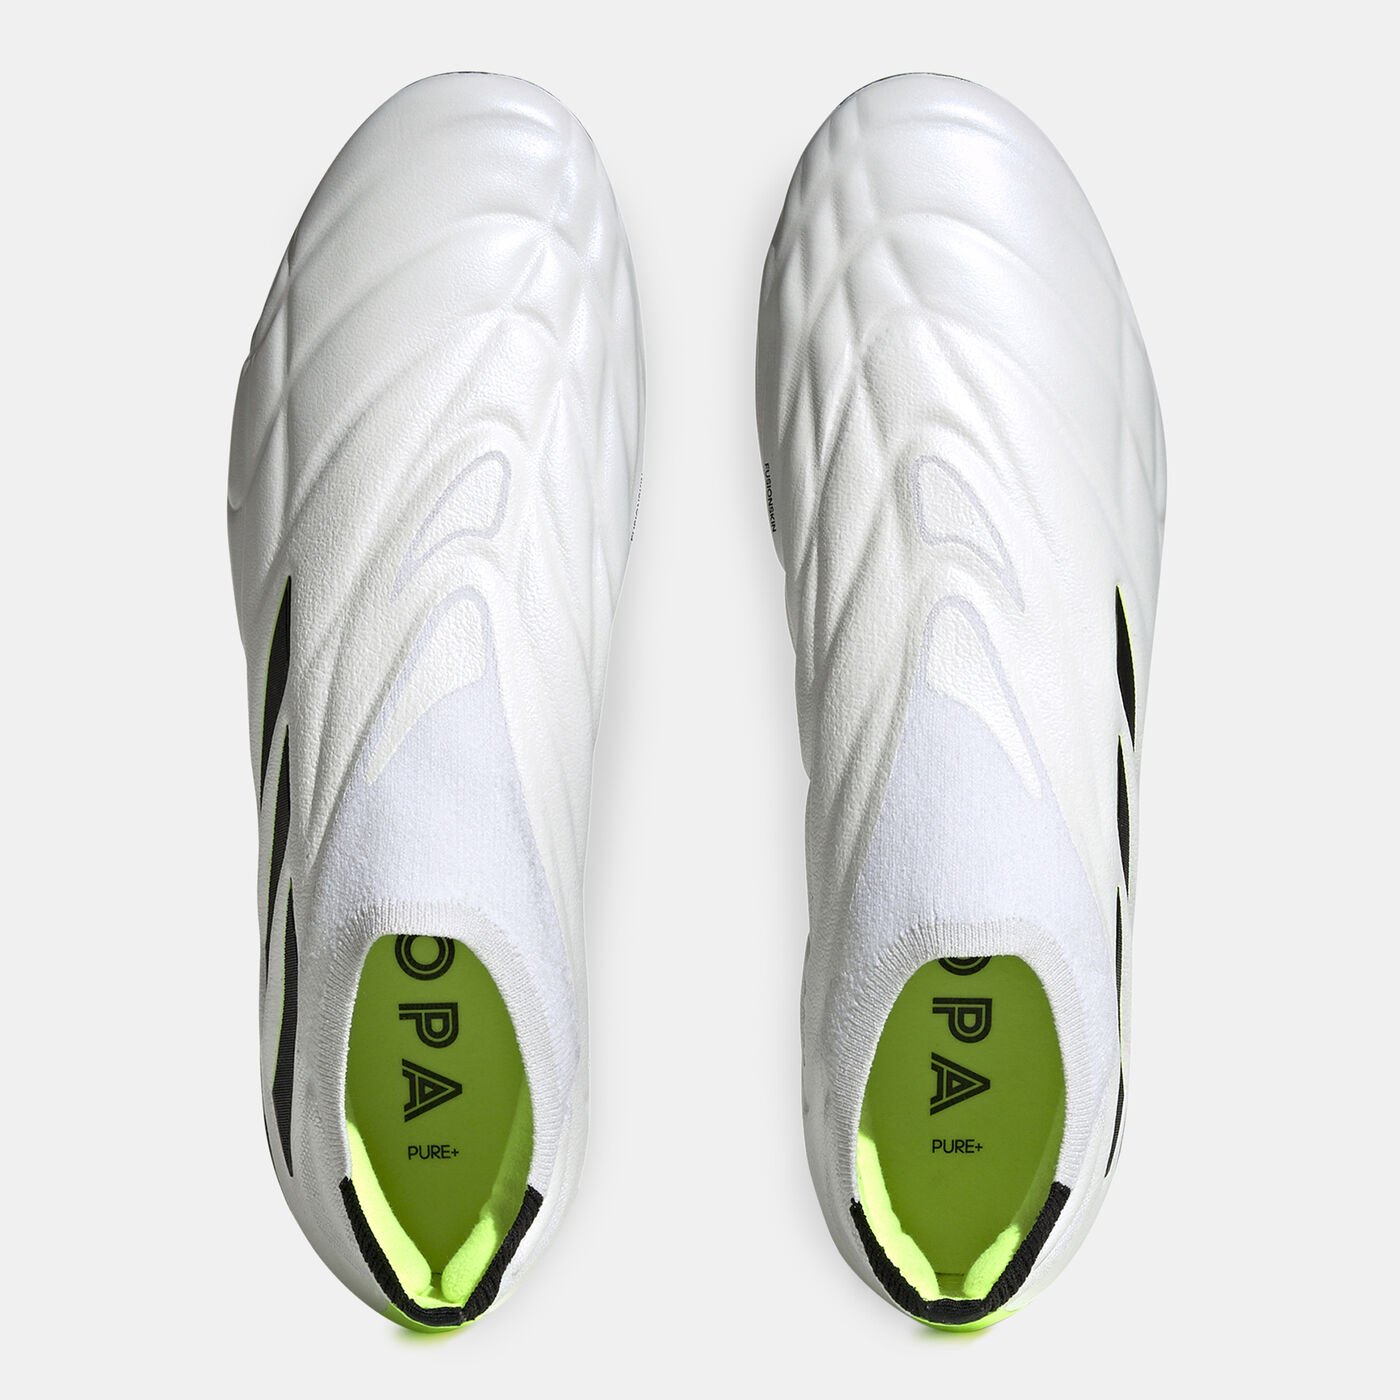 COPA PURE+ Firm Ground Football Shoe